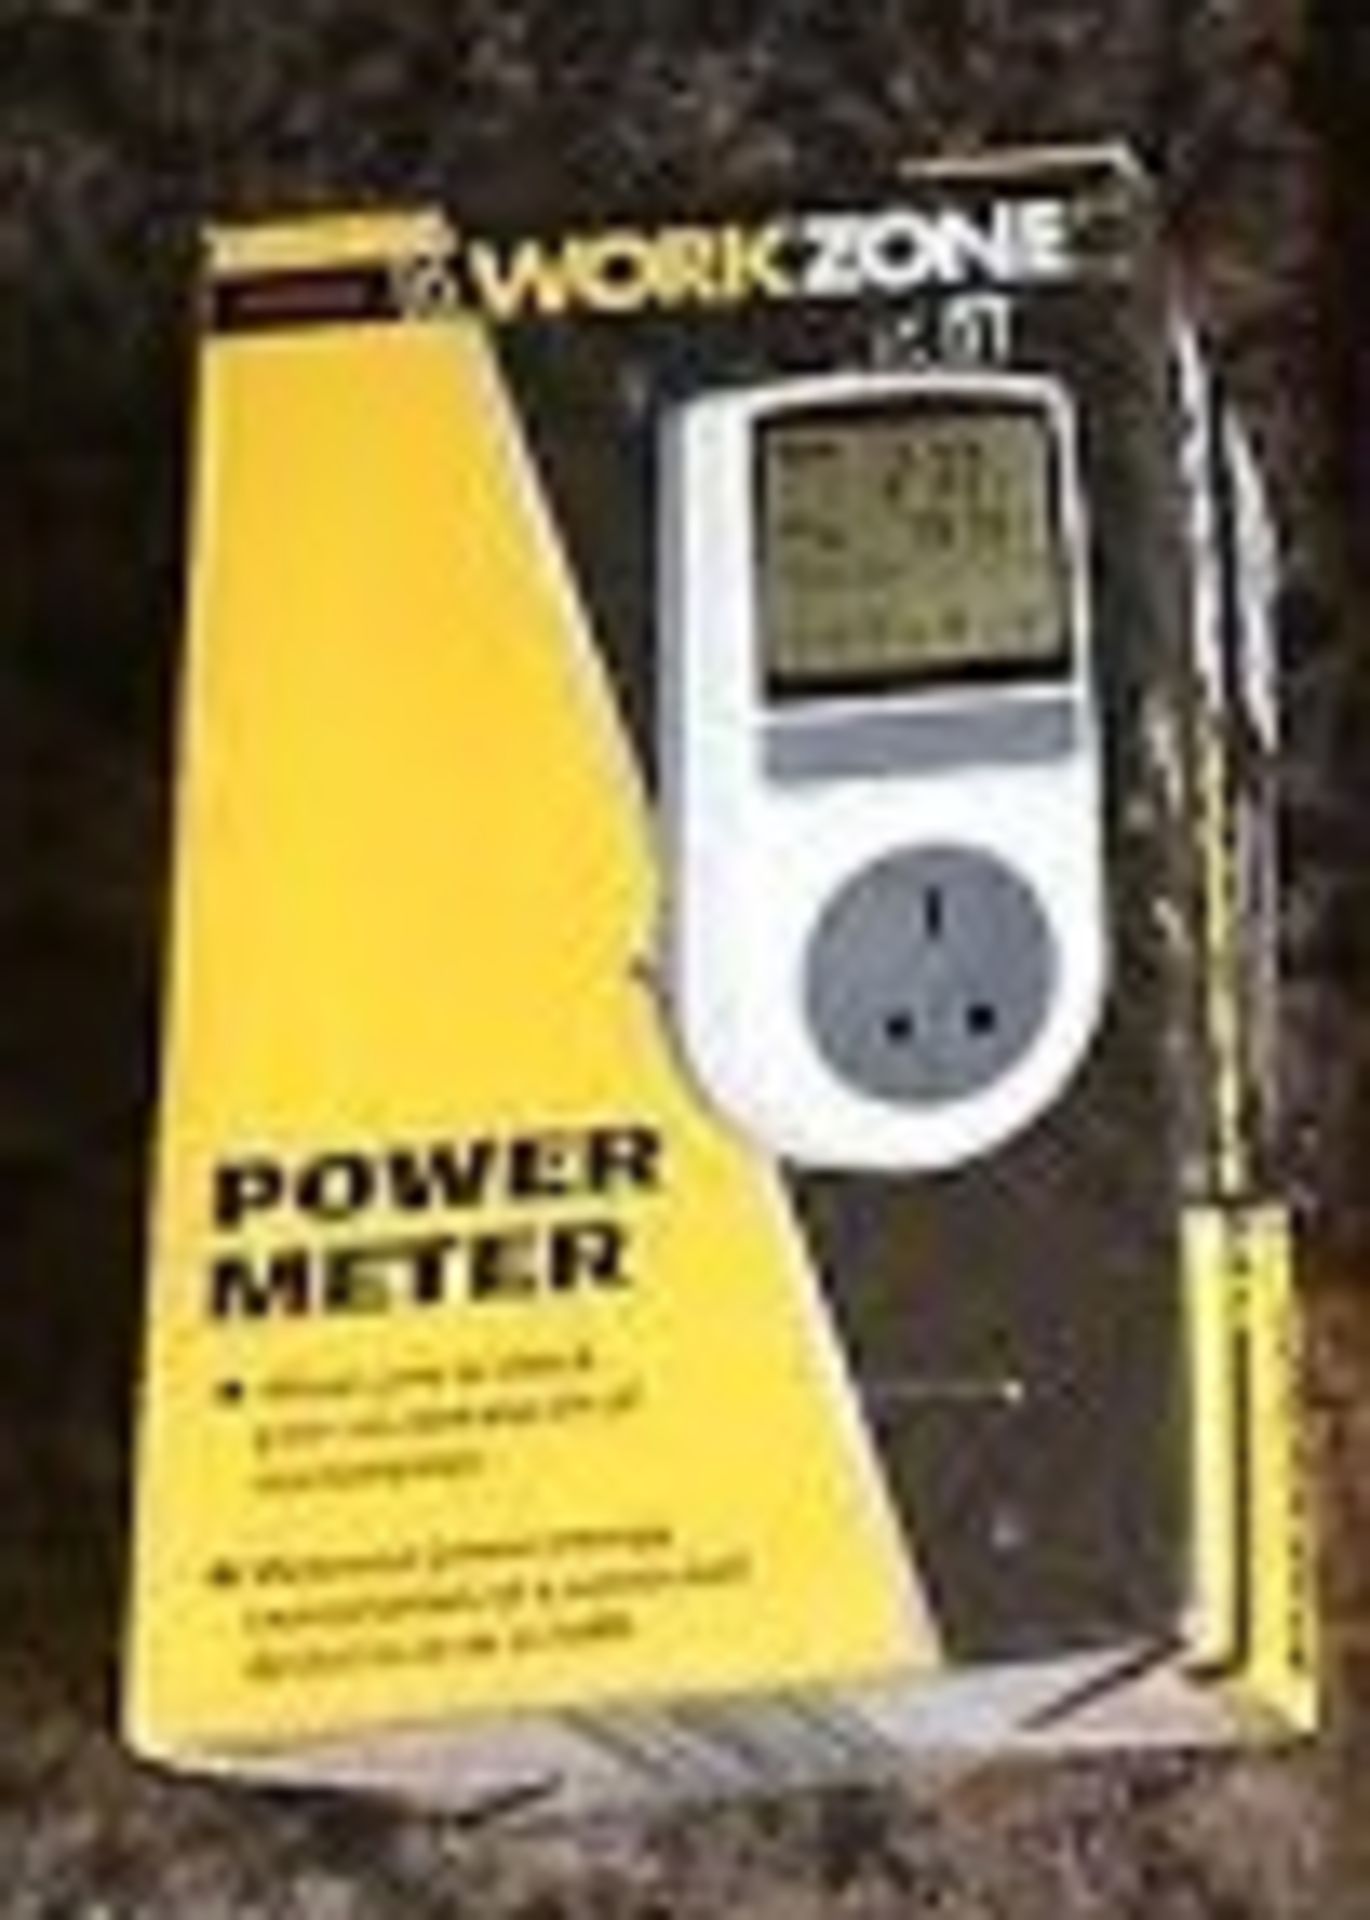 V Brand New Work Zone Display Energy Consumption-Display History Consumption Power Meter